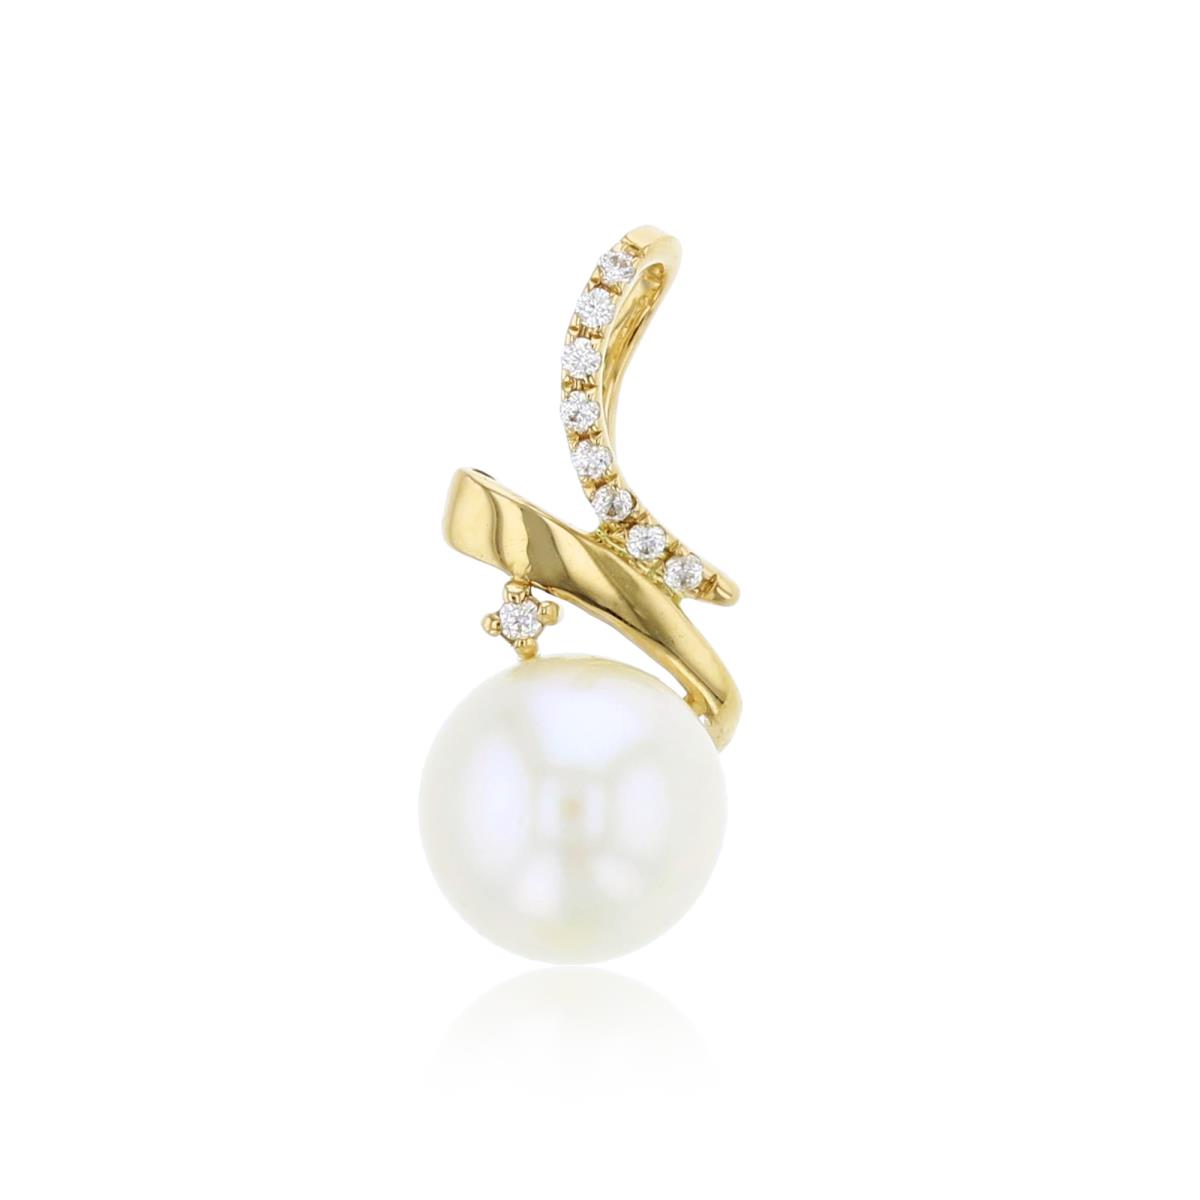 14K Yellow Gold 7mm Round White Pearl with 0.003 & 0.005 CT Diamonds (0.03 CTTW) Fashion Pendant